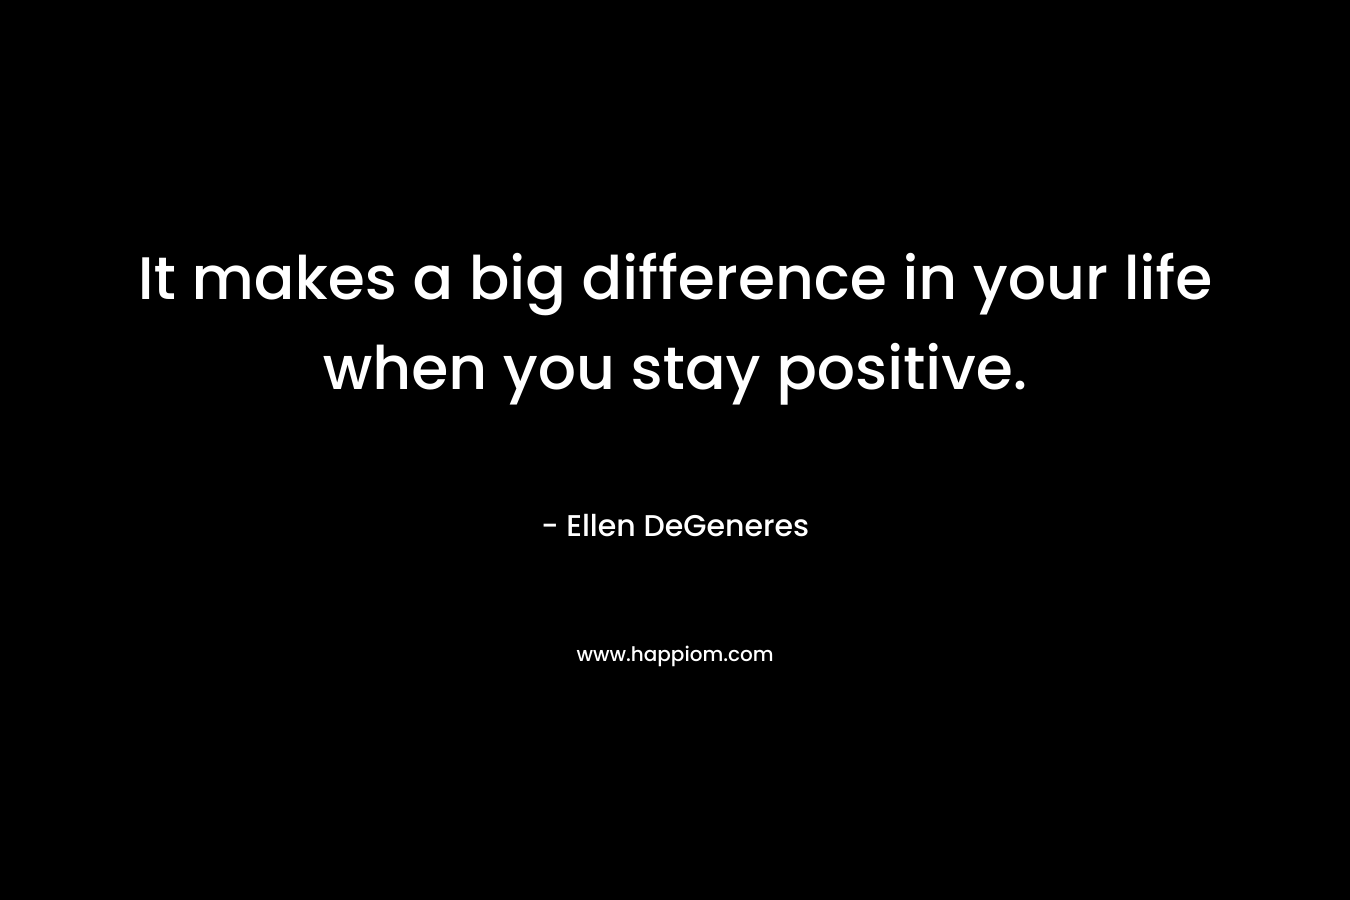 It makes a big difference in your life when you stay positive. – Ellen DeGeneres